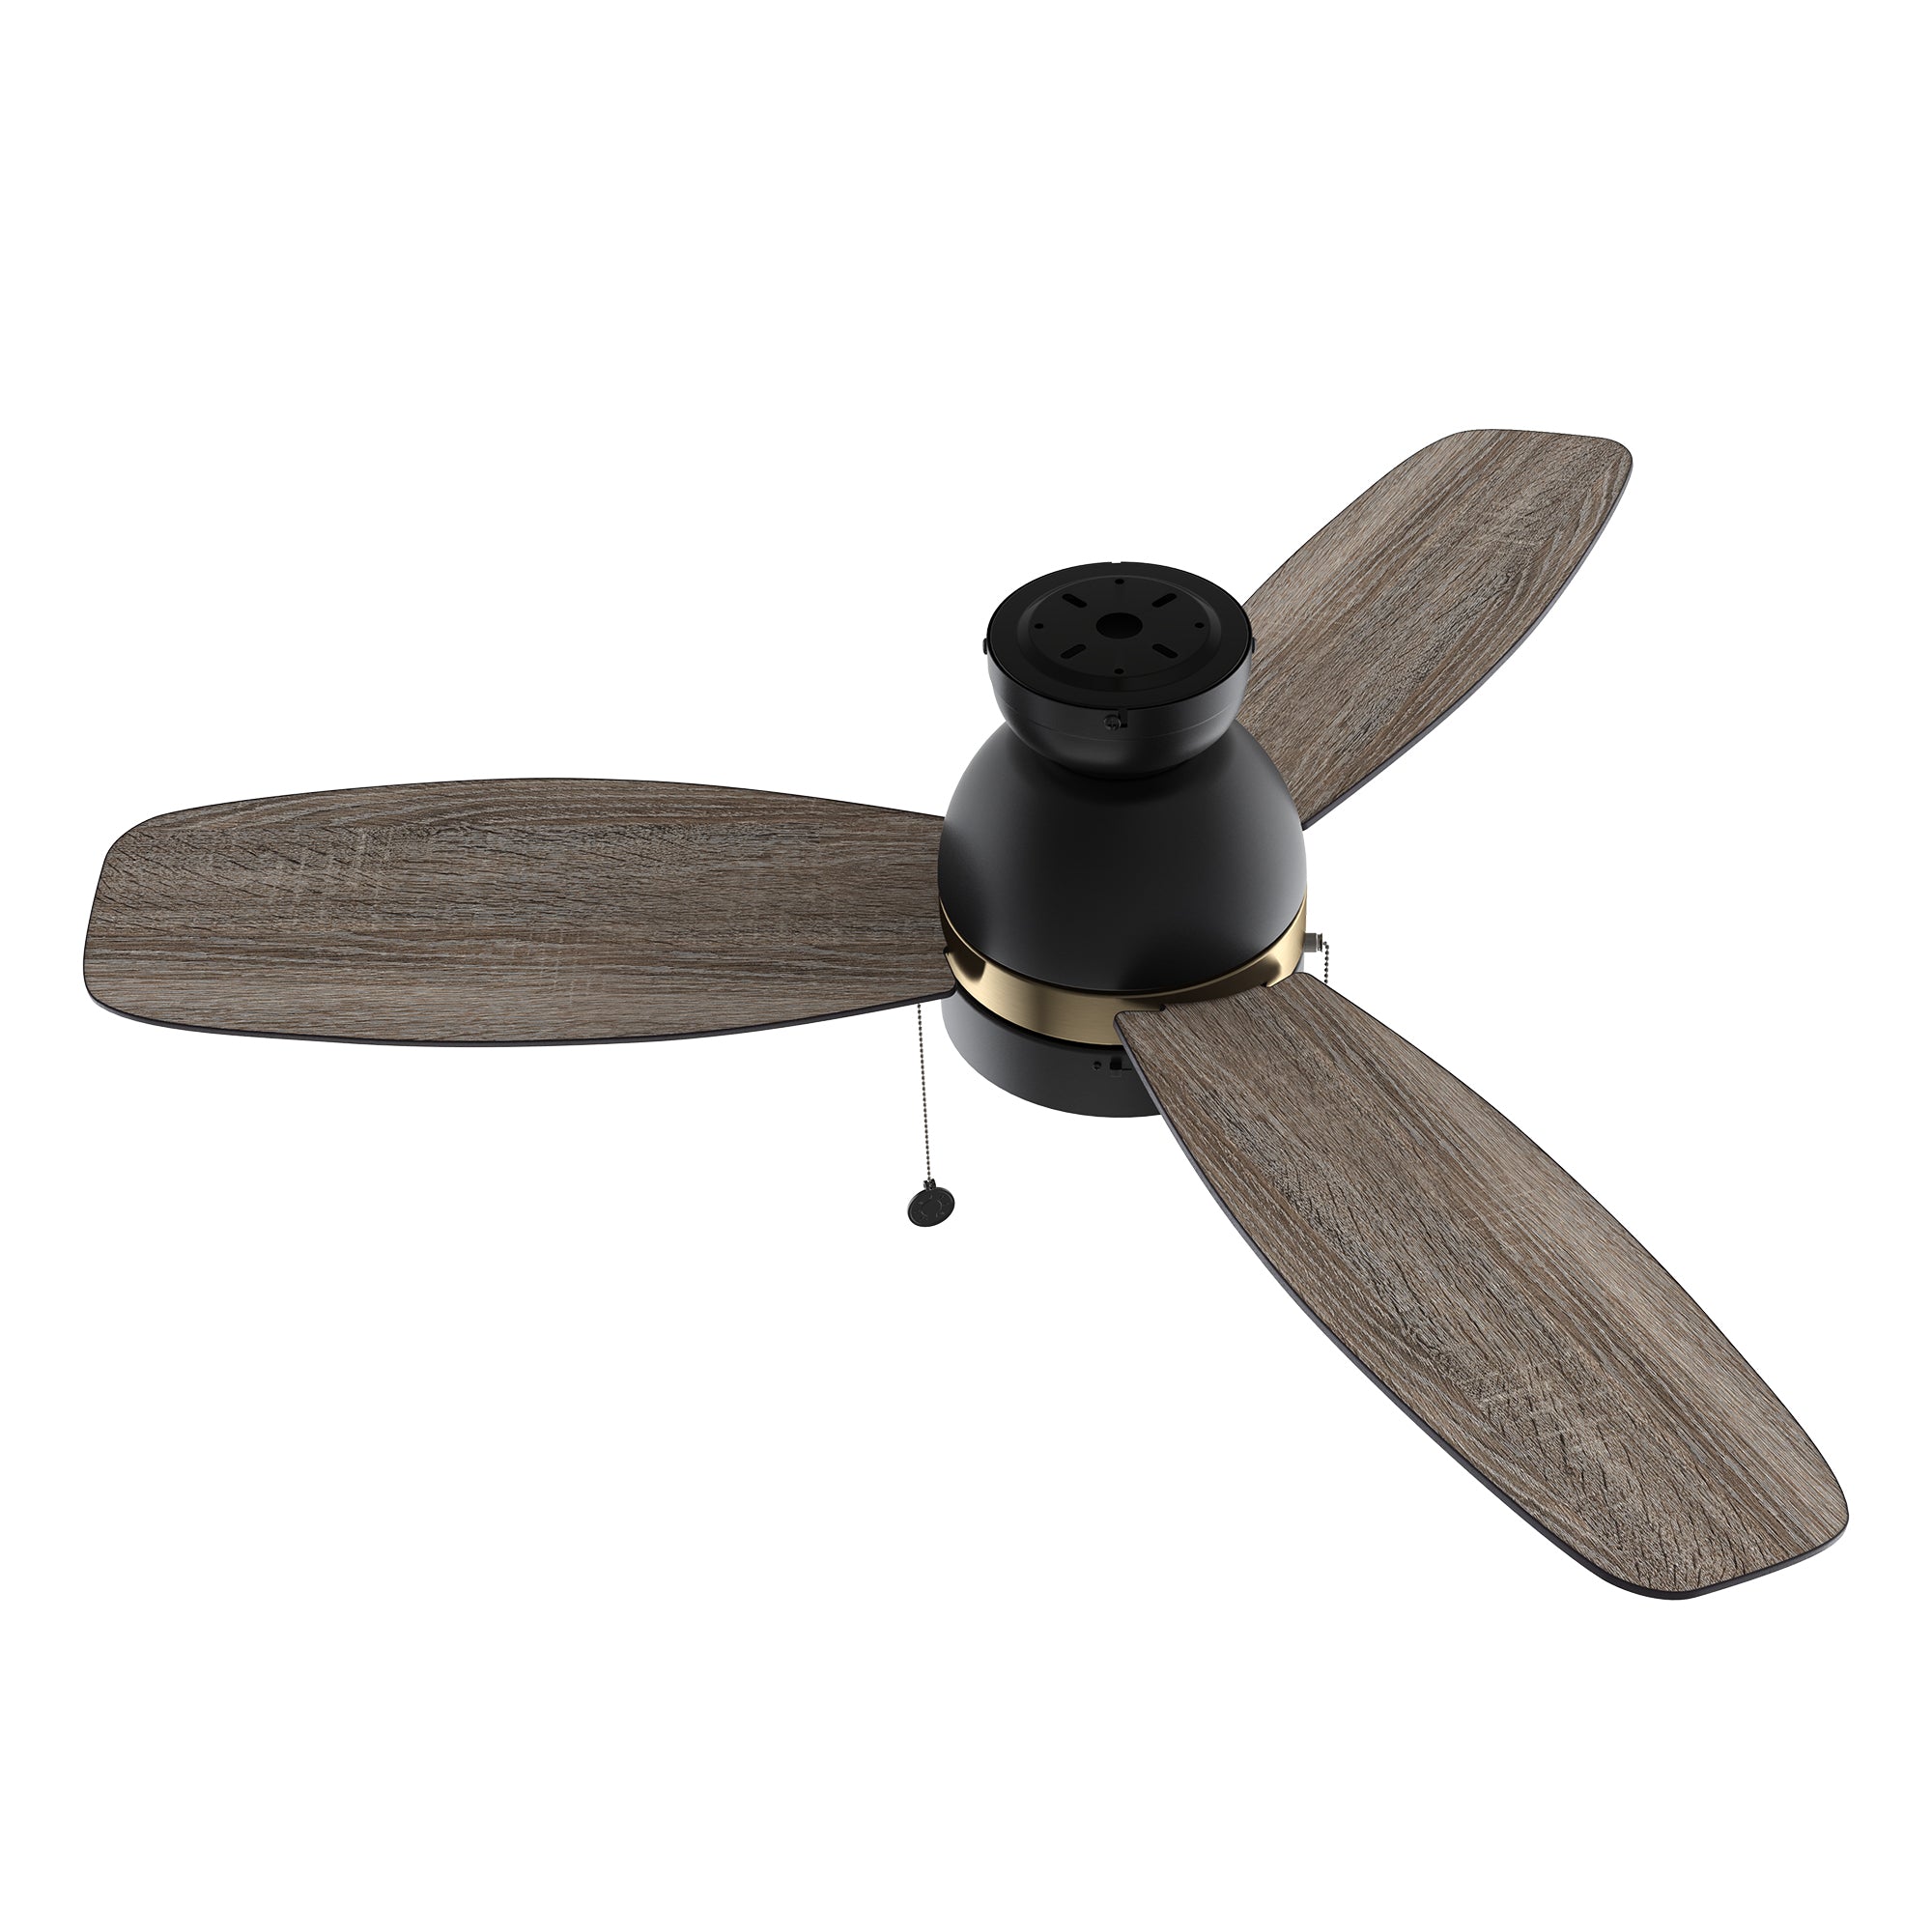 A close up detail of Carro Troyes 48 inch pull-chain ceiling fan, with Black and gold DC motor housing and 3 wood fan blades. 